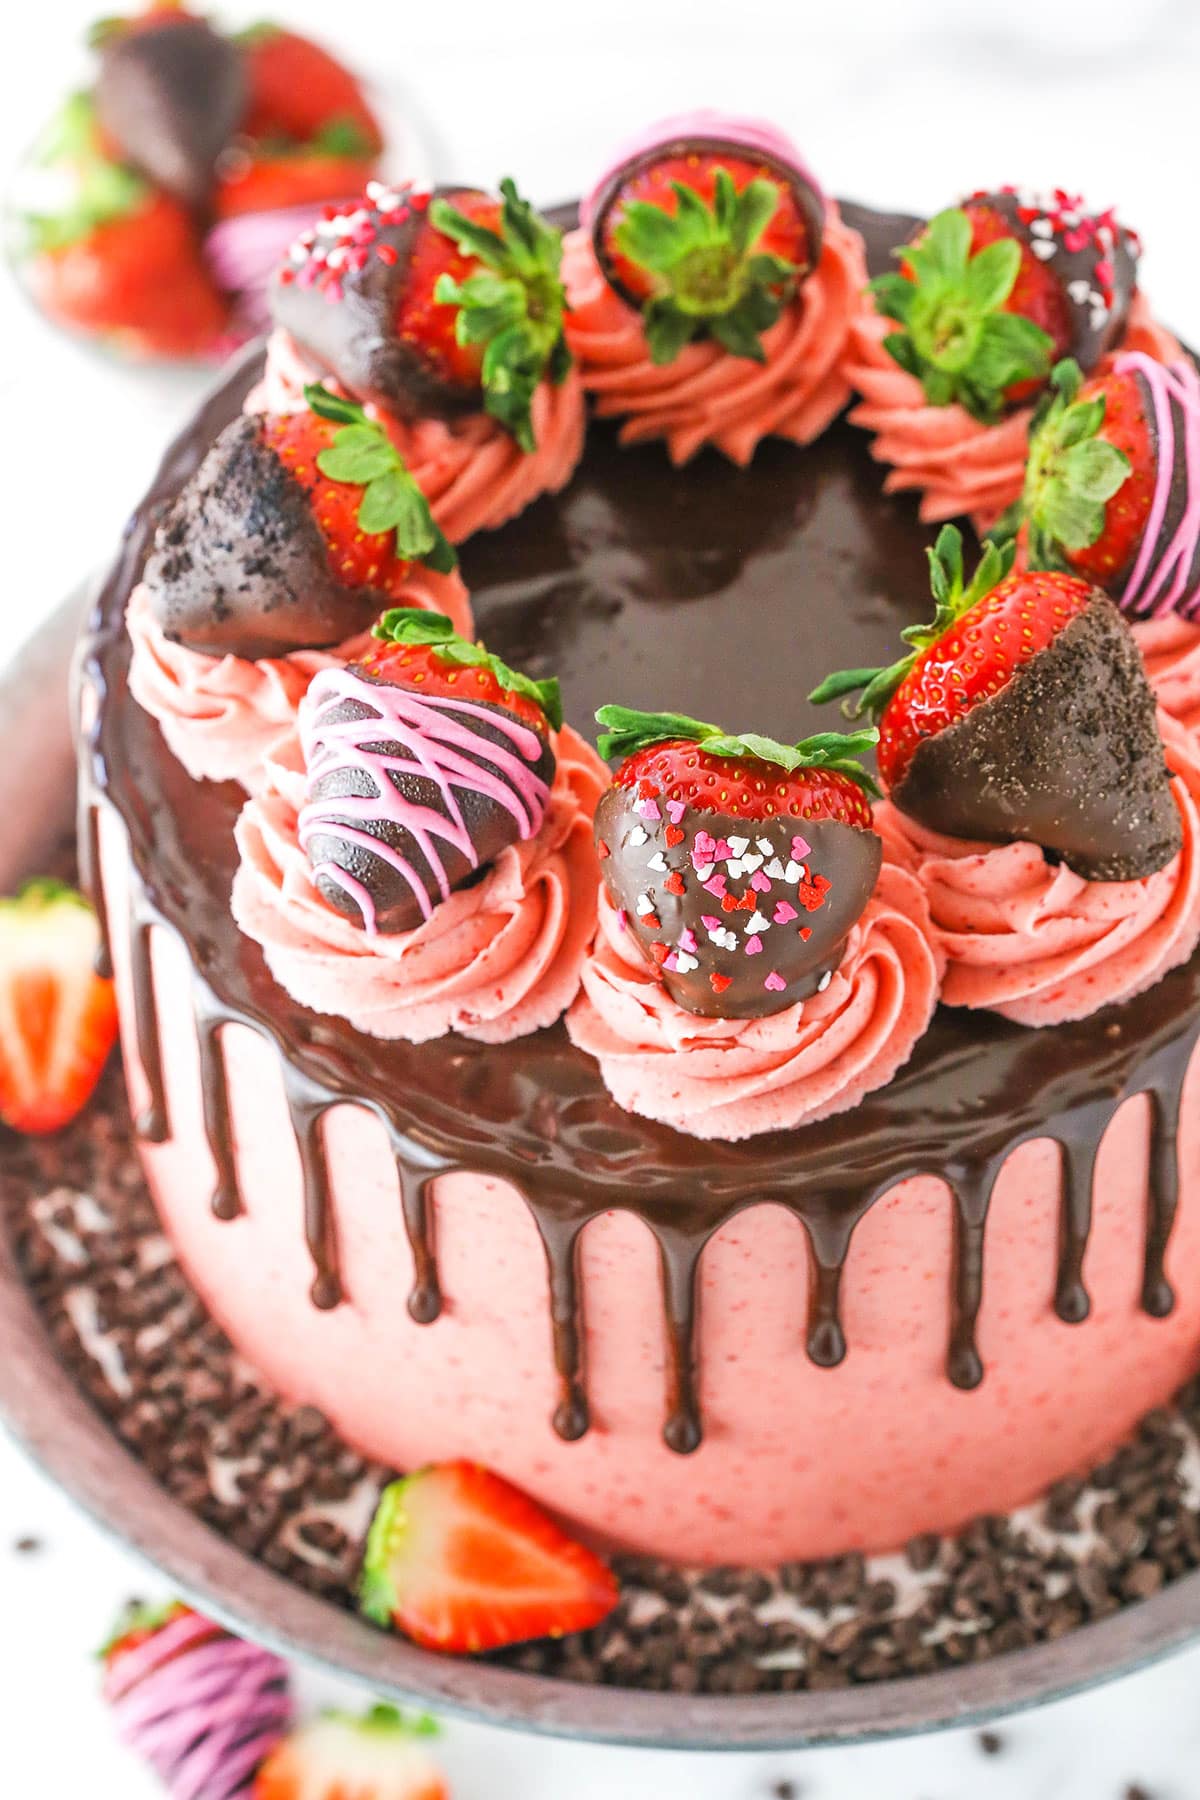 Overhead view of a full Chocolate Covered Strawberry Layer Cake topped with chocolate drip, pink swirls and chocolate covered strawberries on a metal cake stand